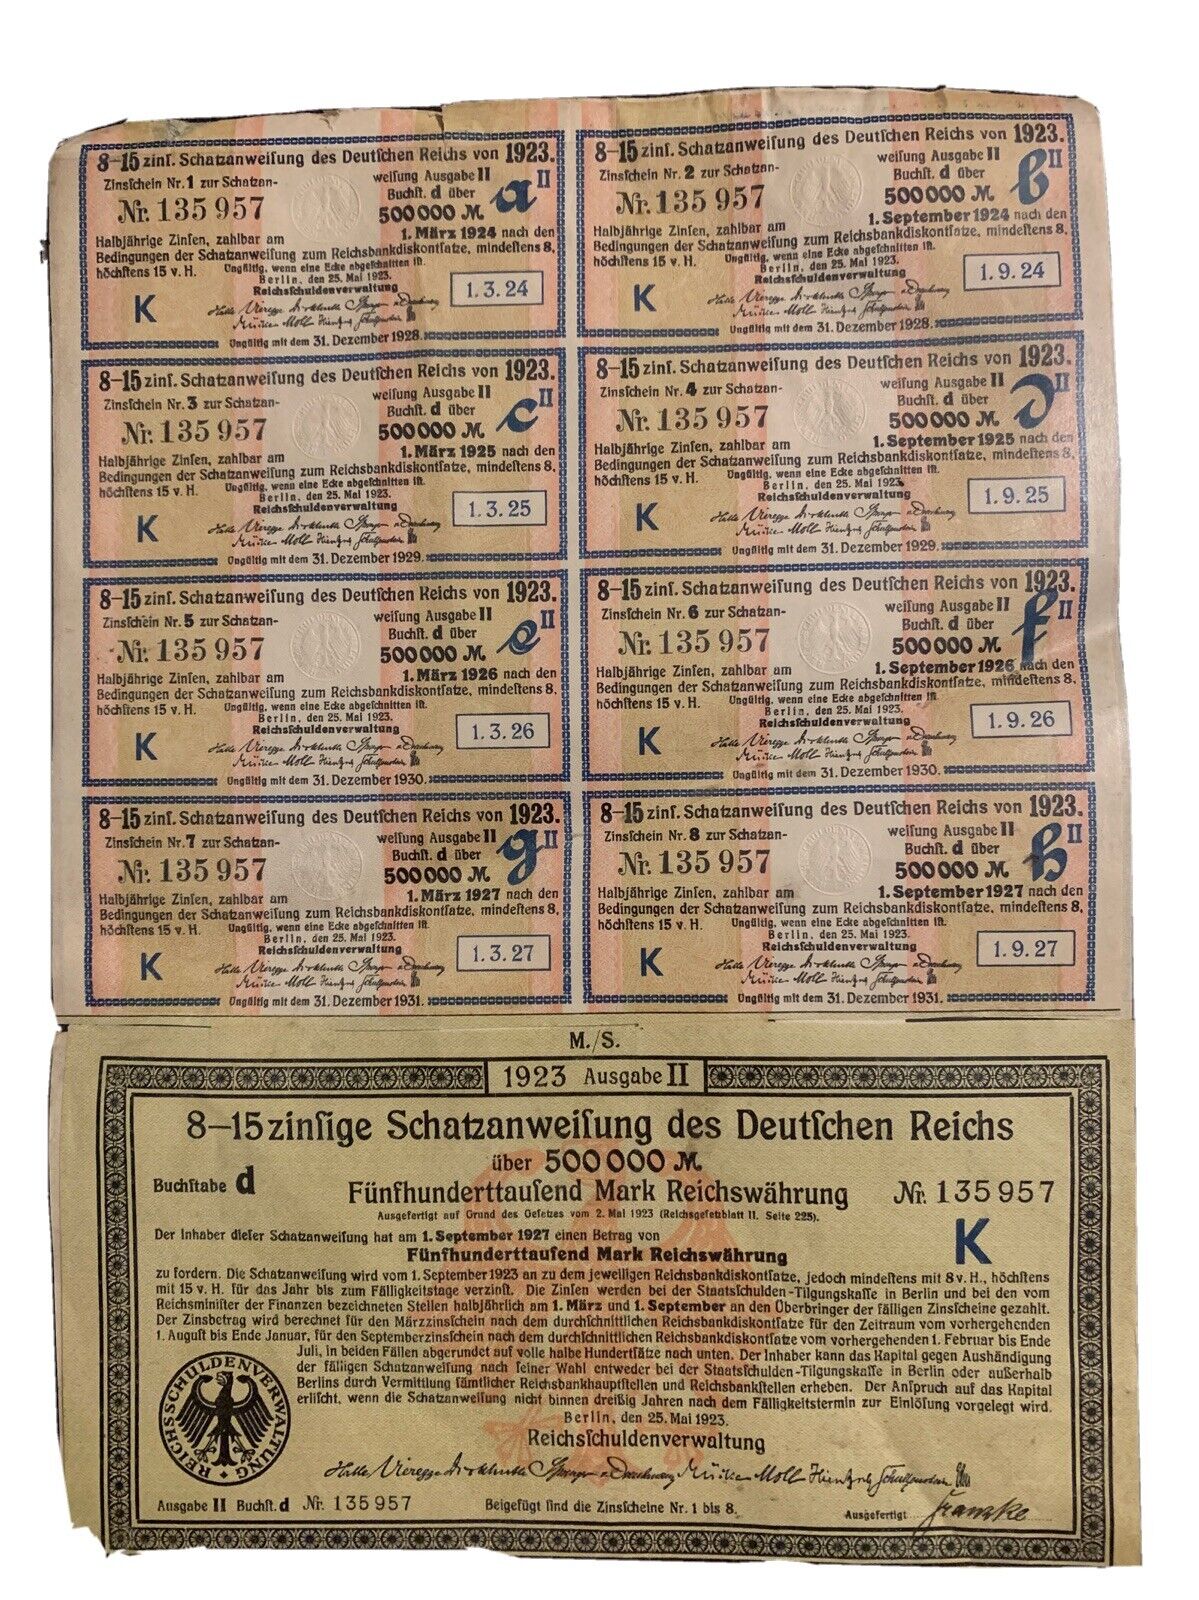 GERMANY German 8-15% Treasury Bond 500,000 Marks 1924 with coupons